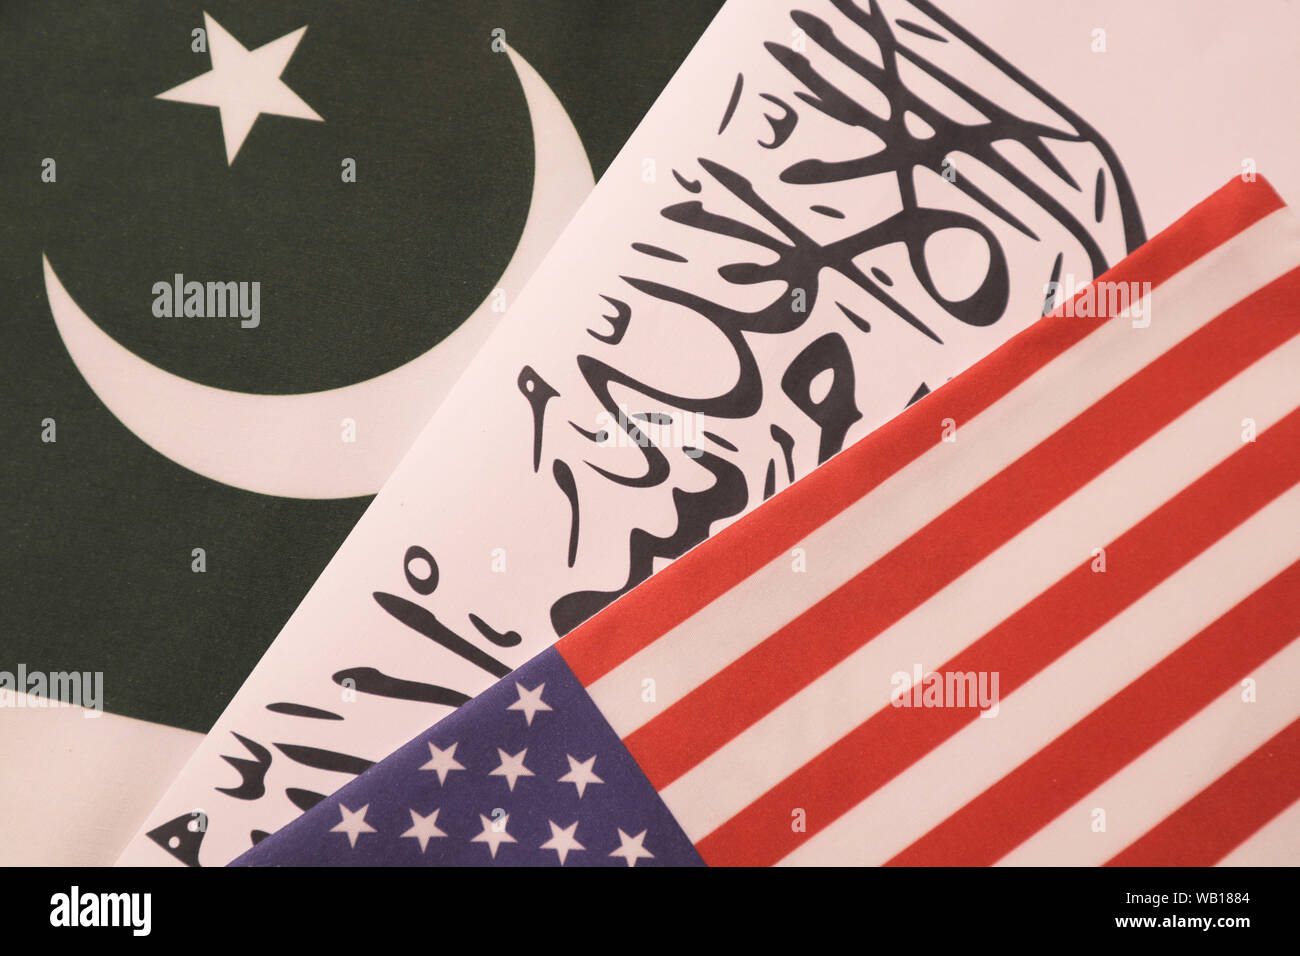 Concept showing of US, Pakistan and Taliban deal preocess showing with flags. Stock Photo